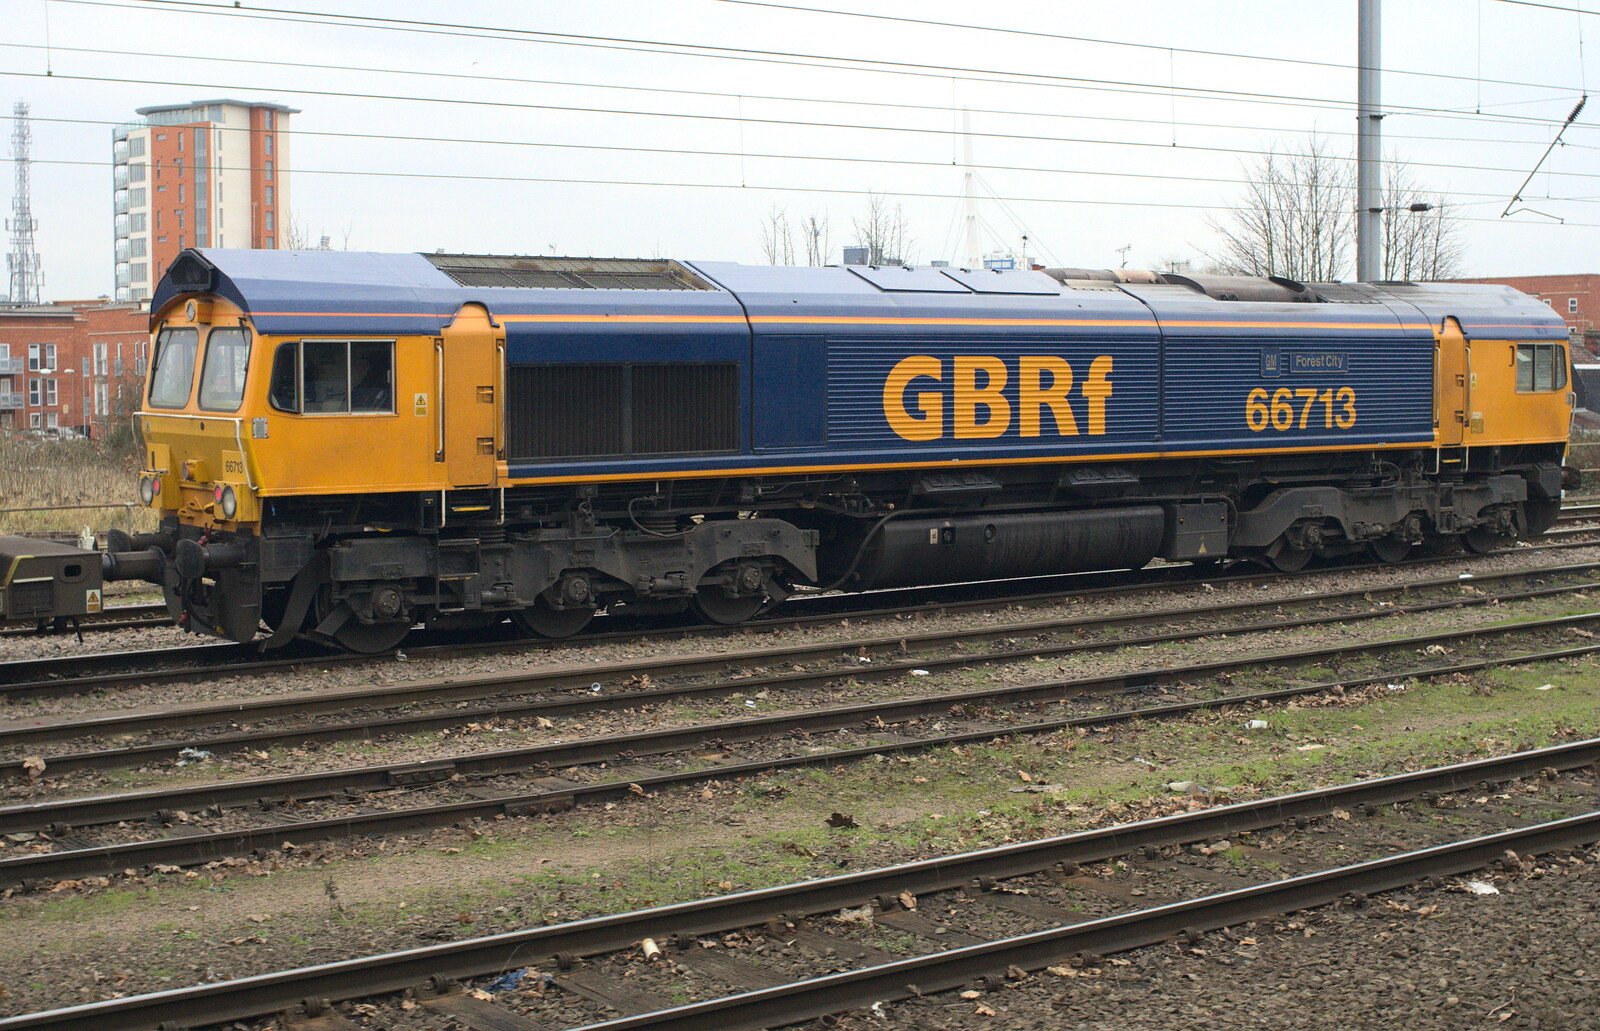 One of the Class 66 'Sheds' in the goods yard from The Demolition of the Bacon Factory, Ipswich, Suffolk - 20th February 2013